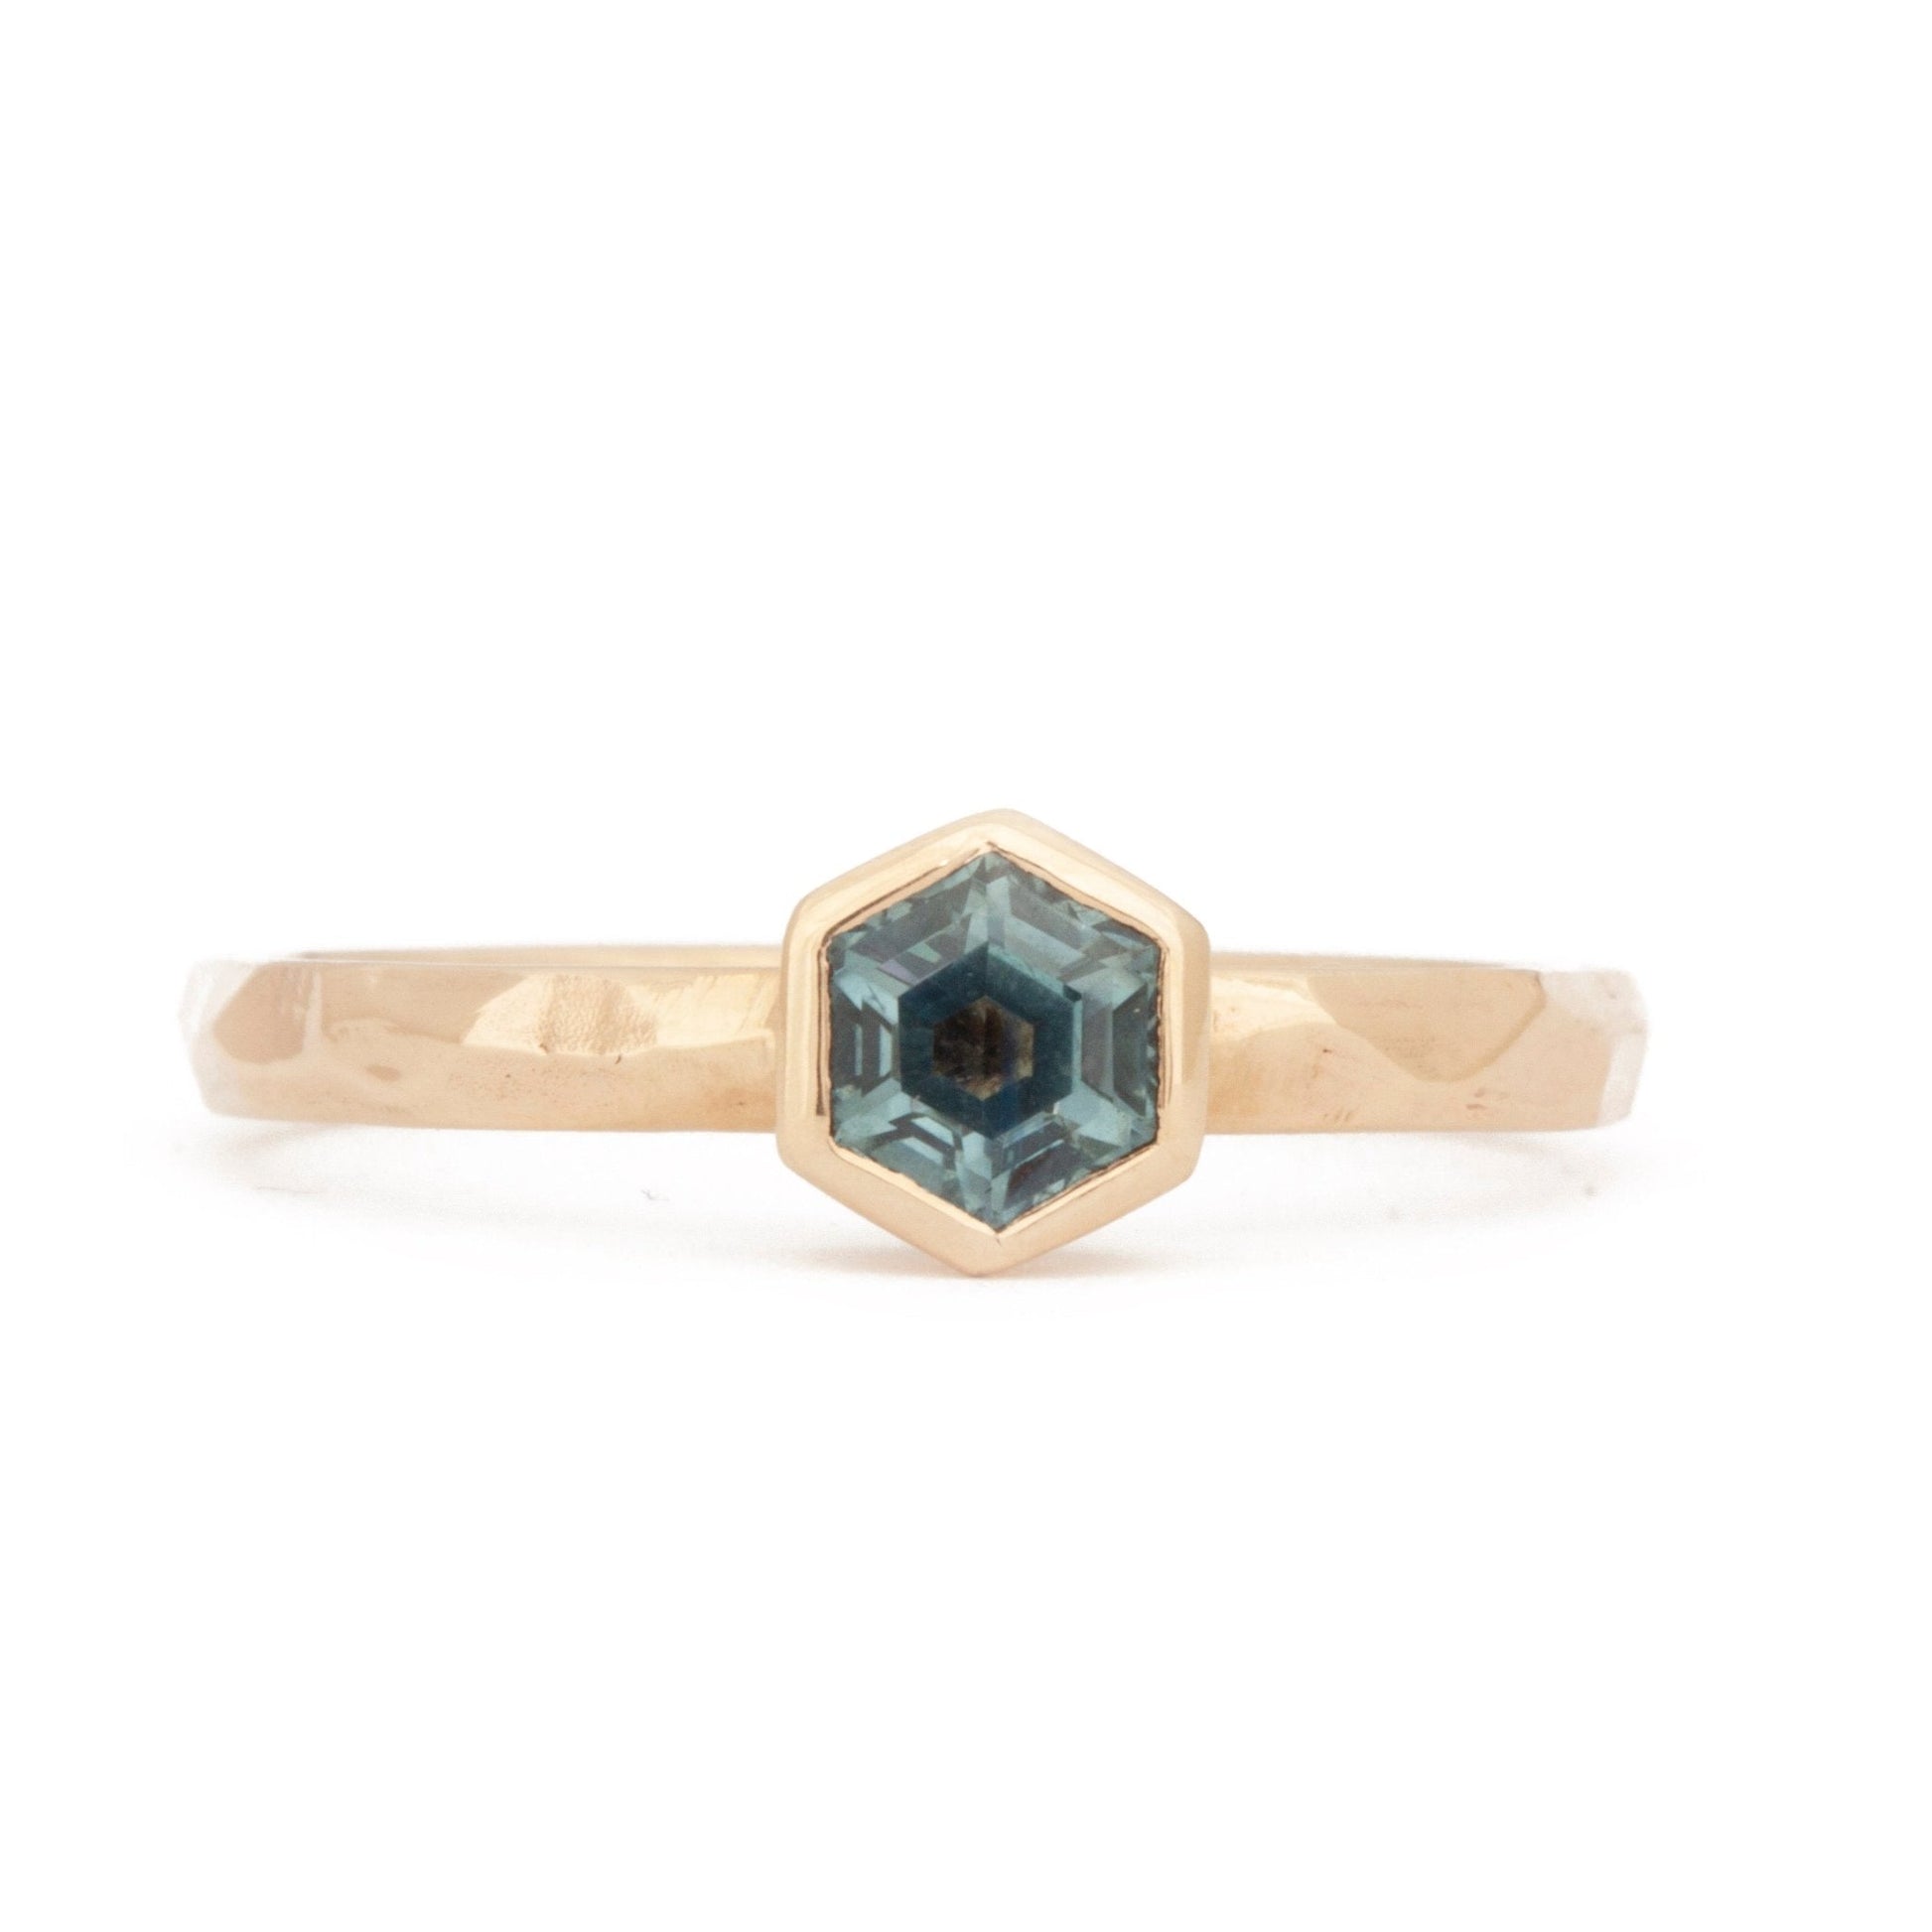 The Fairmined Montana Sapphire Hexagon Carved Solitaire (Ready to ship in size 9.5) - W.R. Metalarts